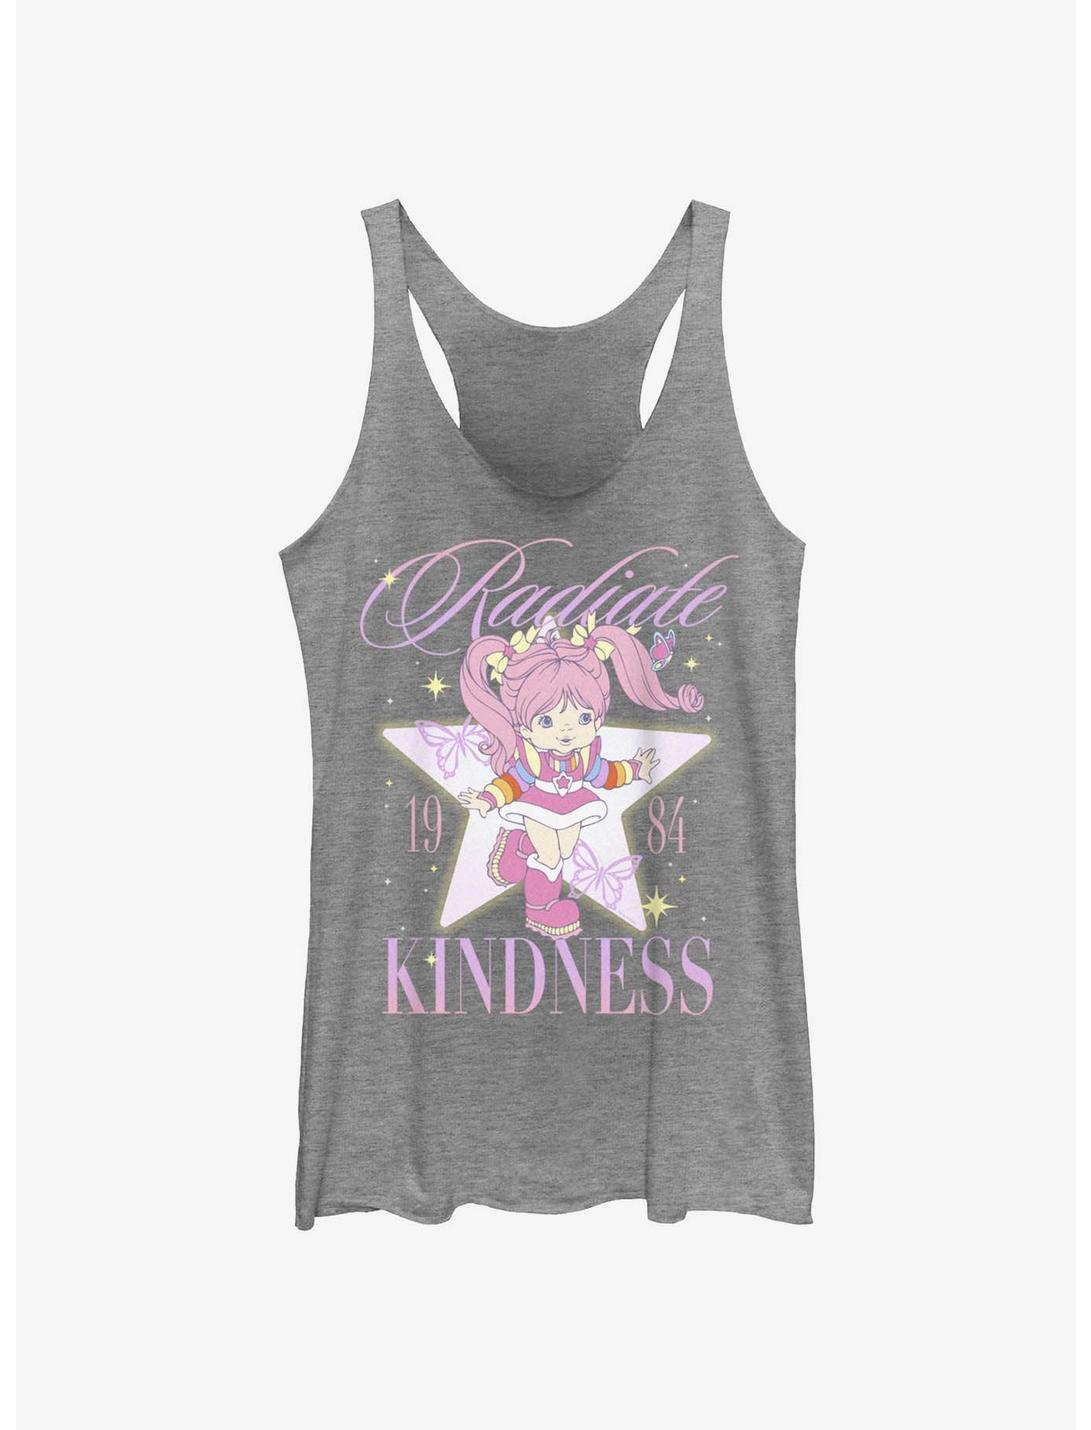 Rainbow Brite Tickled Pink Radiate Kindness Womens Tank Top, GRAY HTR, hi-res